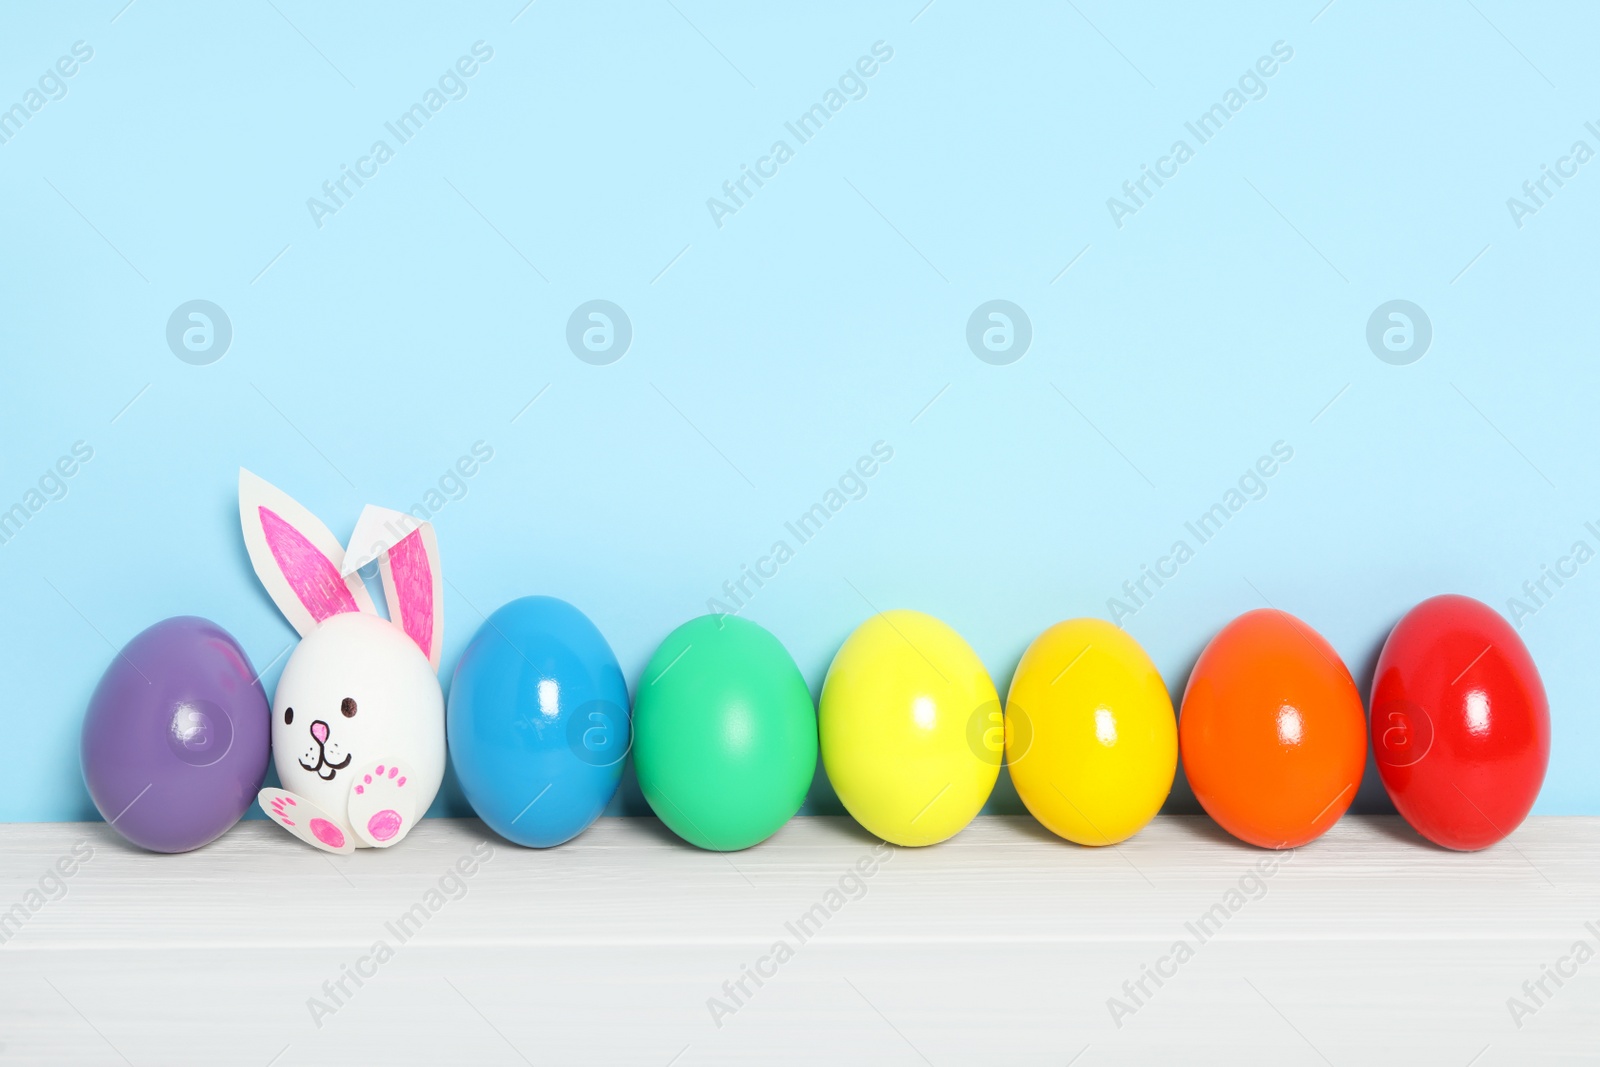 Photo of Bright Easter eggs and white one as cute bunny on wooden table against light blue background, space for text